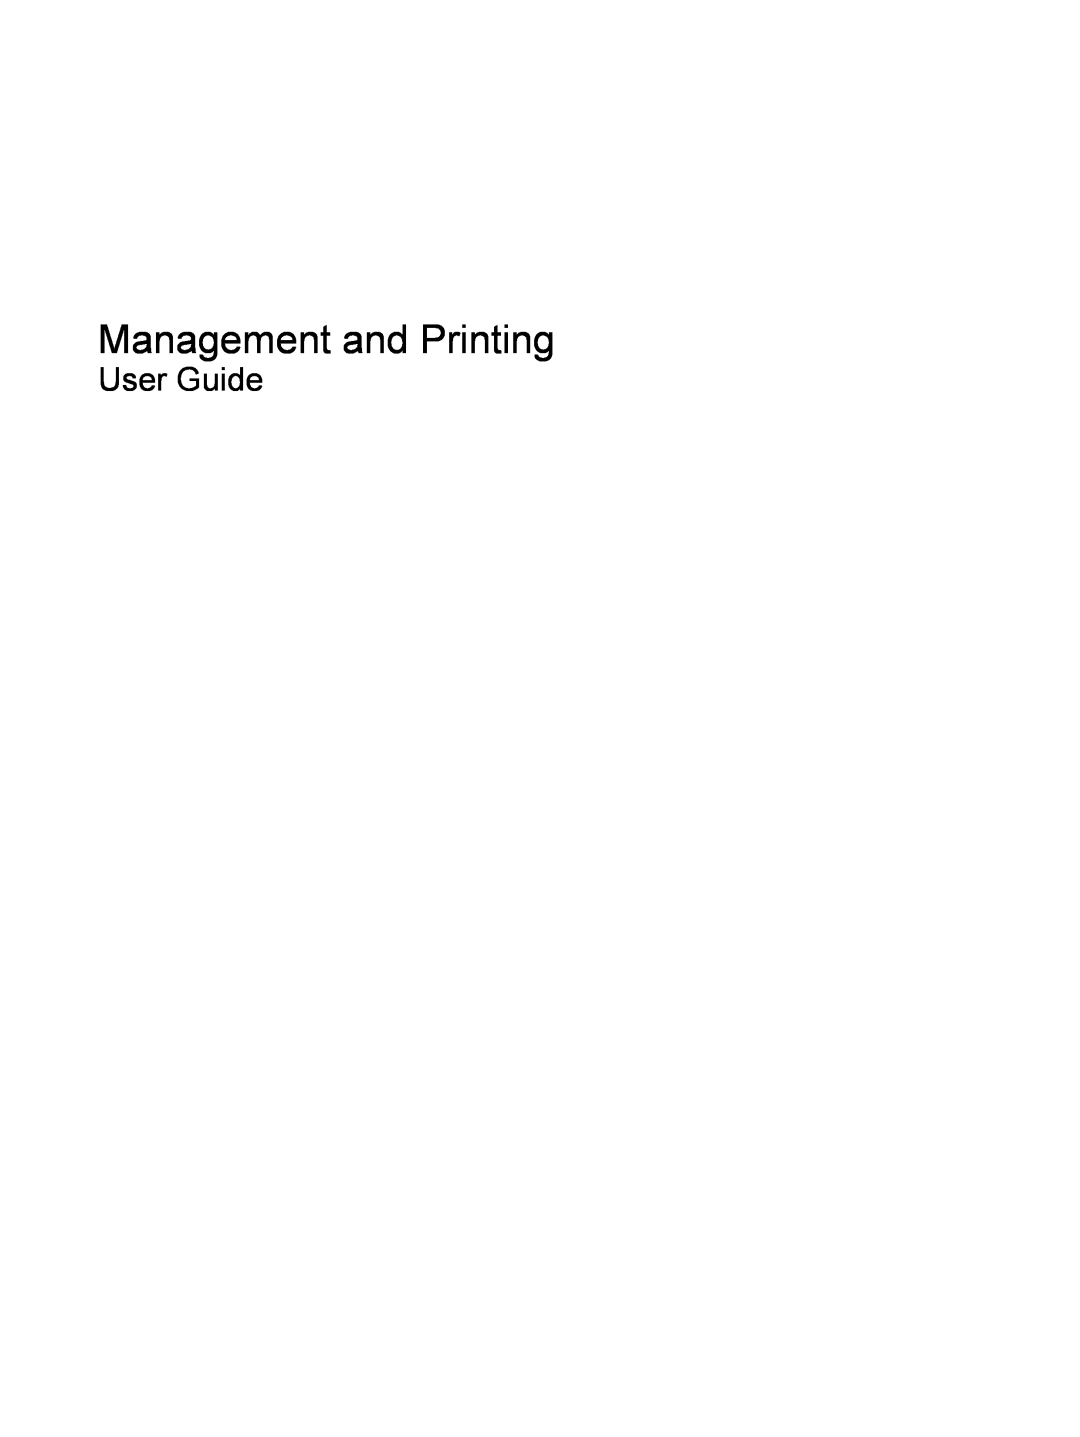 HP 530 manual Management and Printing, User Guide 